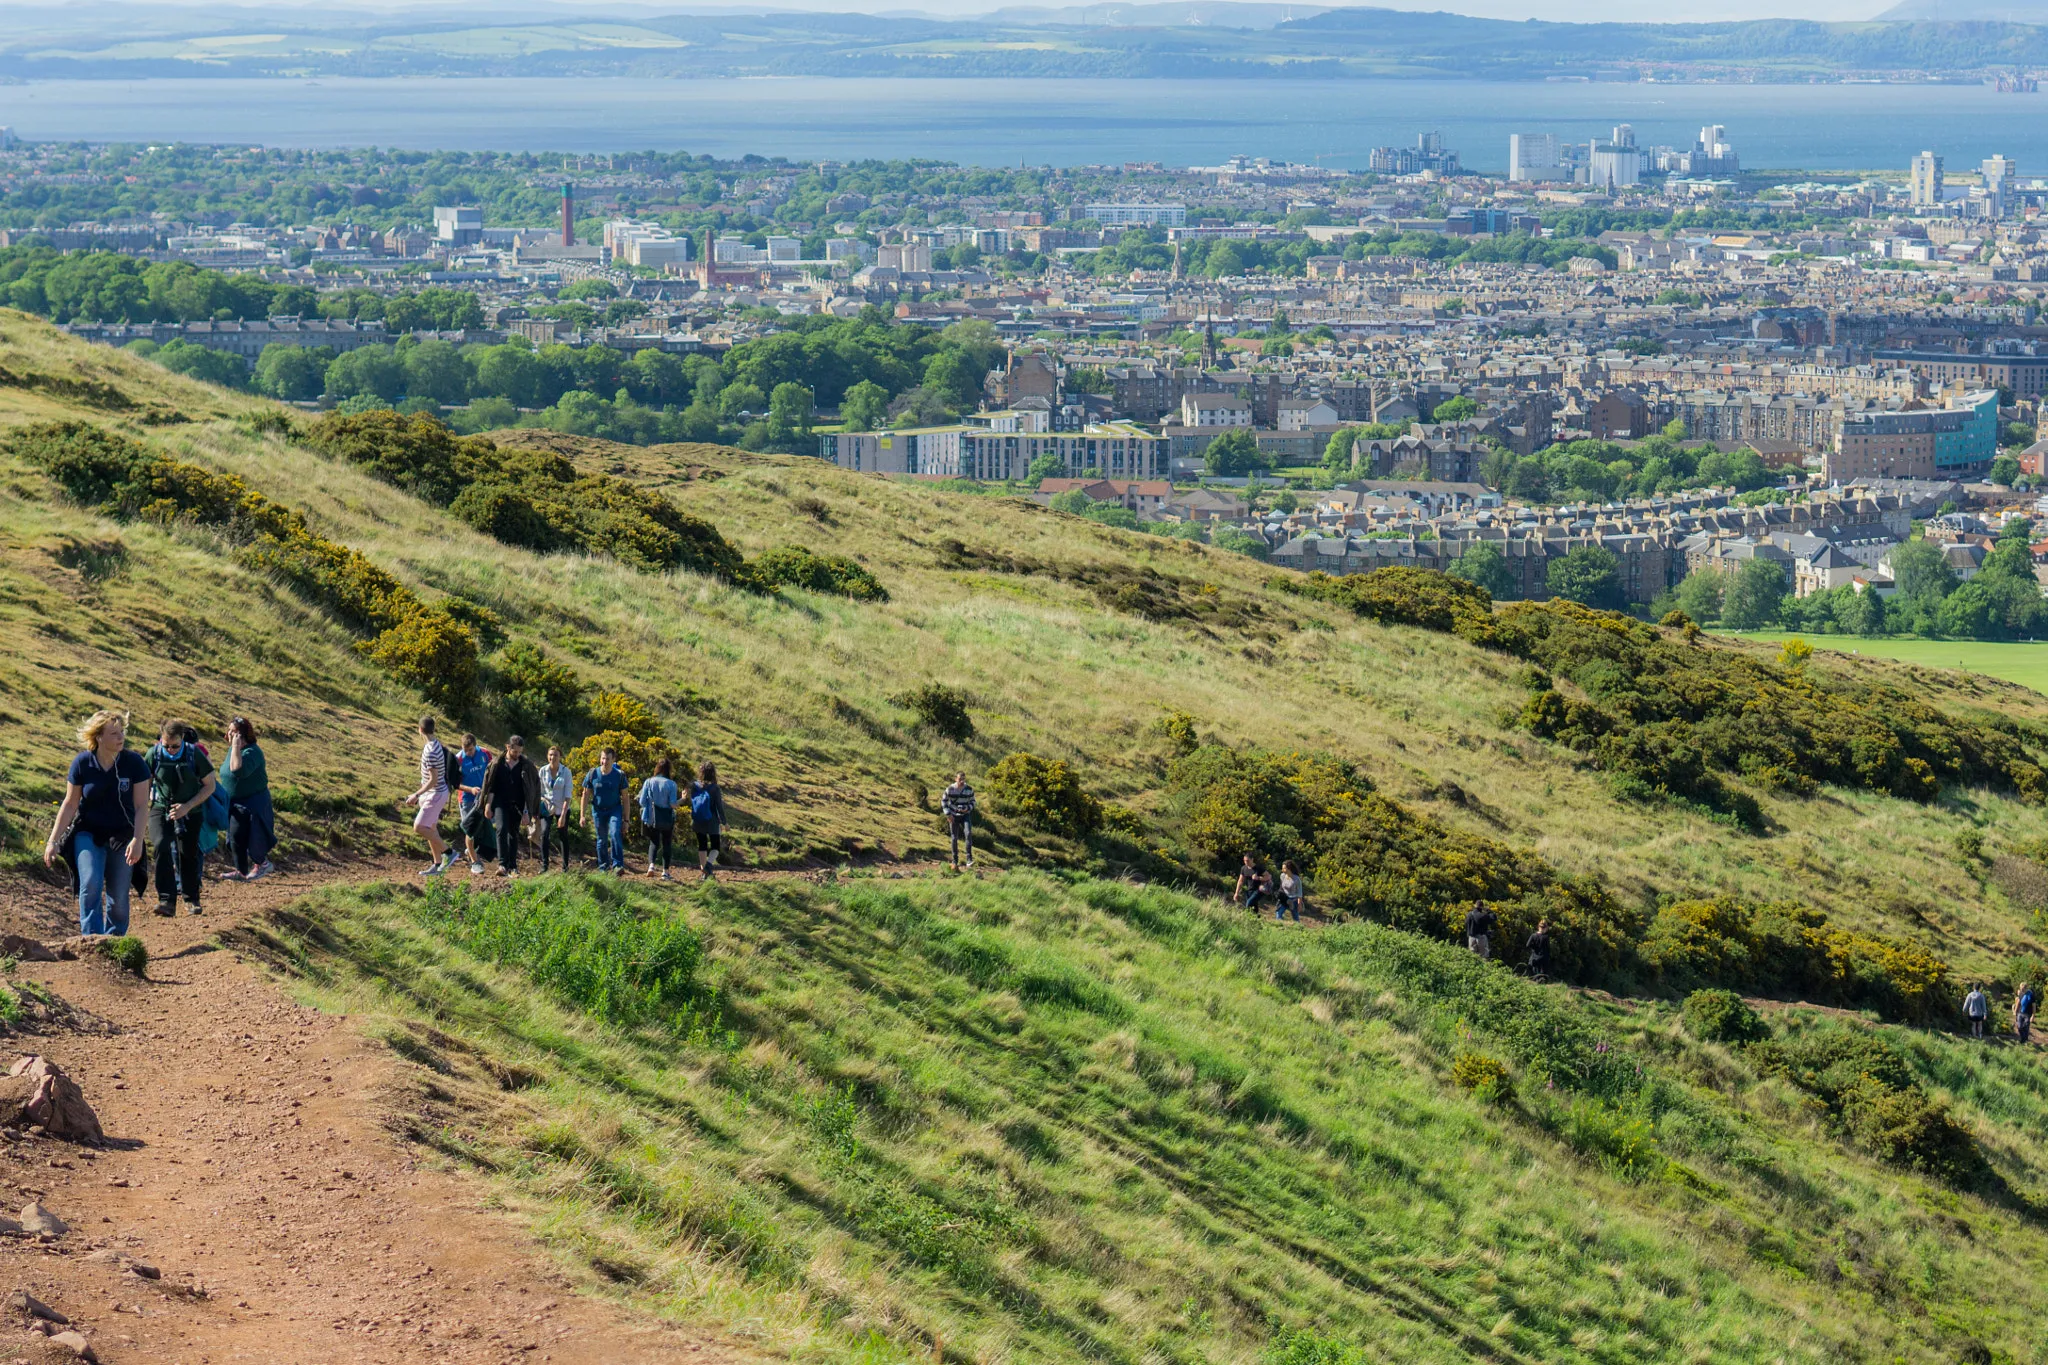 Photo showing: 500px provided description: Saturday trip up Arthur's Seat. [#field ,#sky ,#landscape ,#soil ,#people ,#nature ,#travel ,#house ,#tourism ,#tree ,#summer ,#grass ,#fun ,#mountain ,#agriculture ,#hill ,#panoramic ,#rural ,#farm ,#outdoors ,#horizontal ,#relaxation ,#group ,#leisure ,#grads ,#no person ,#skyscanner]